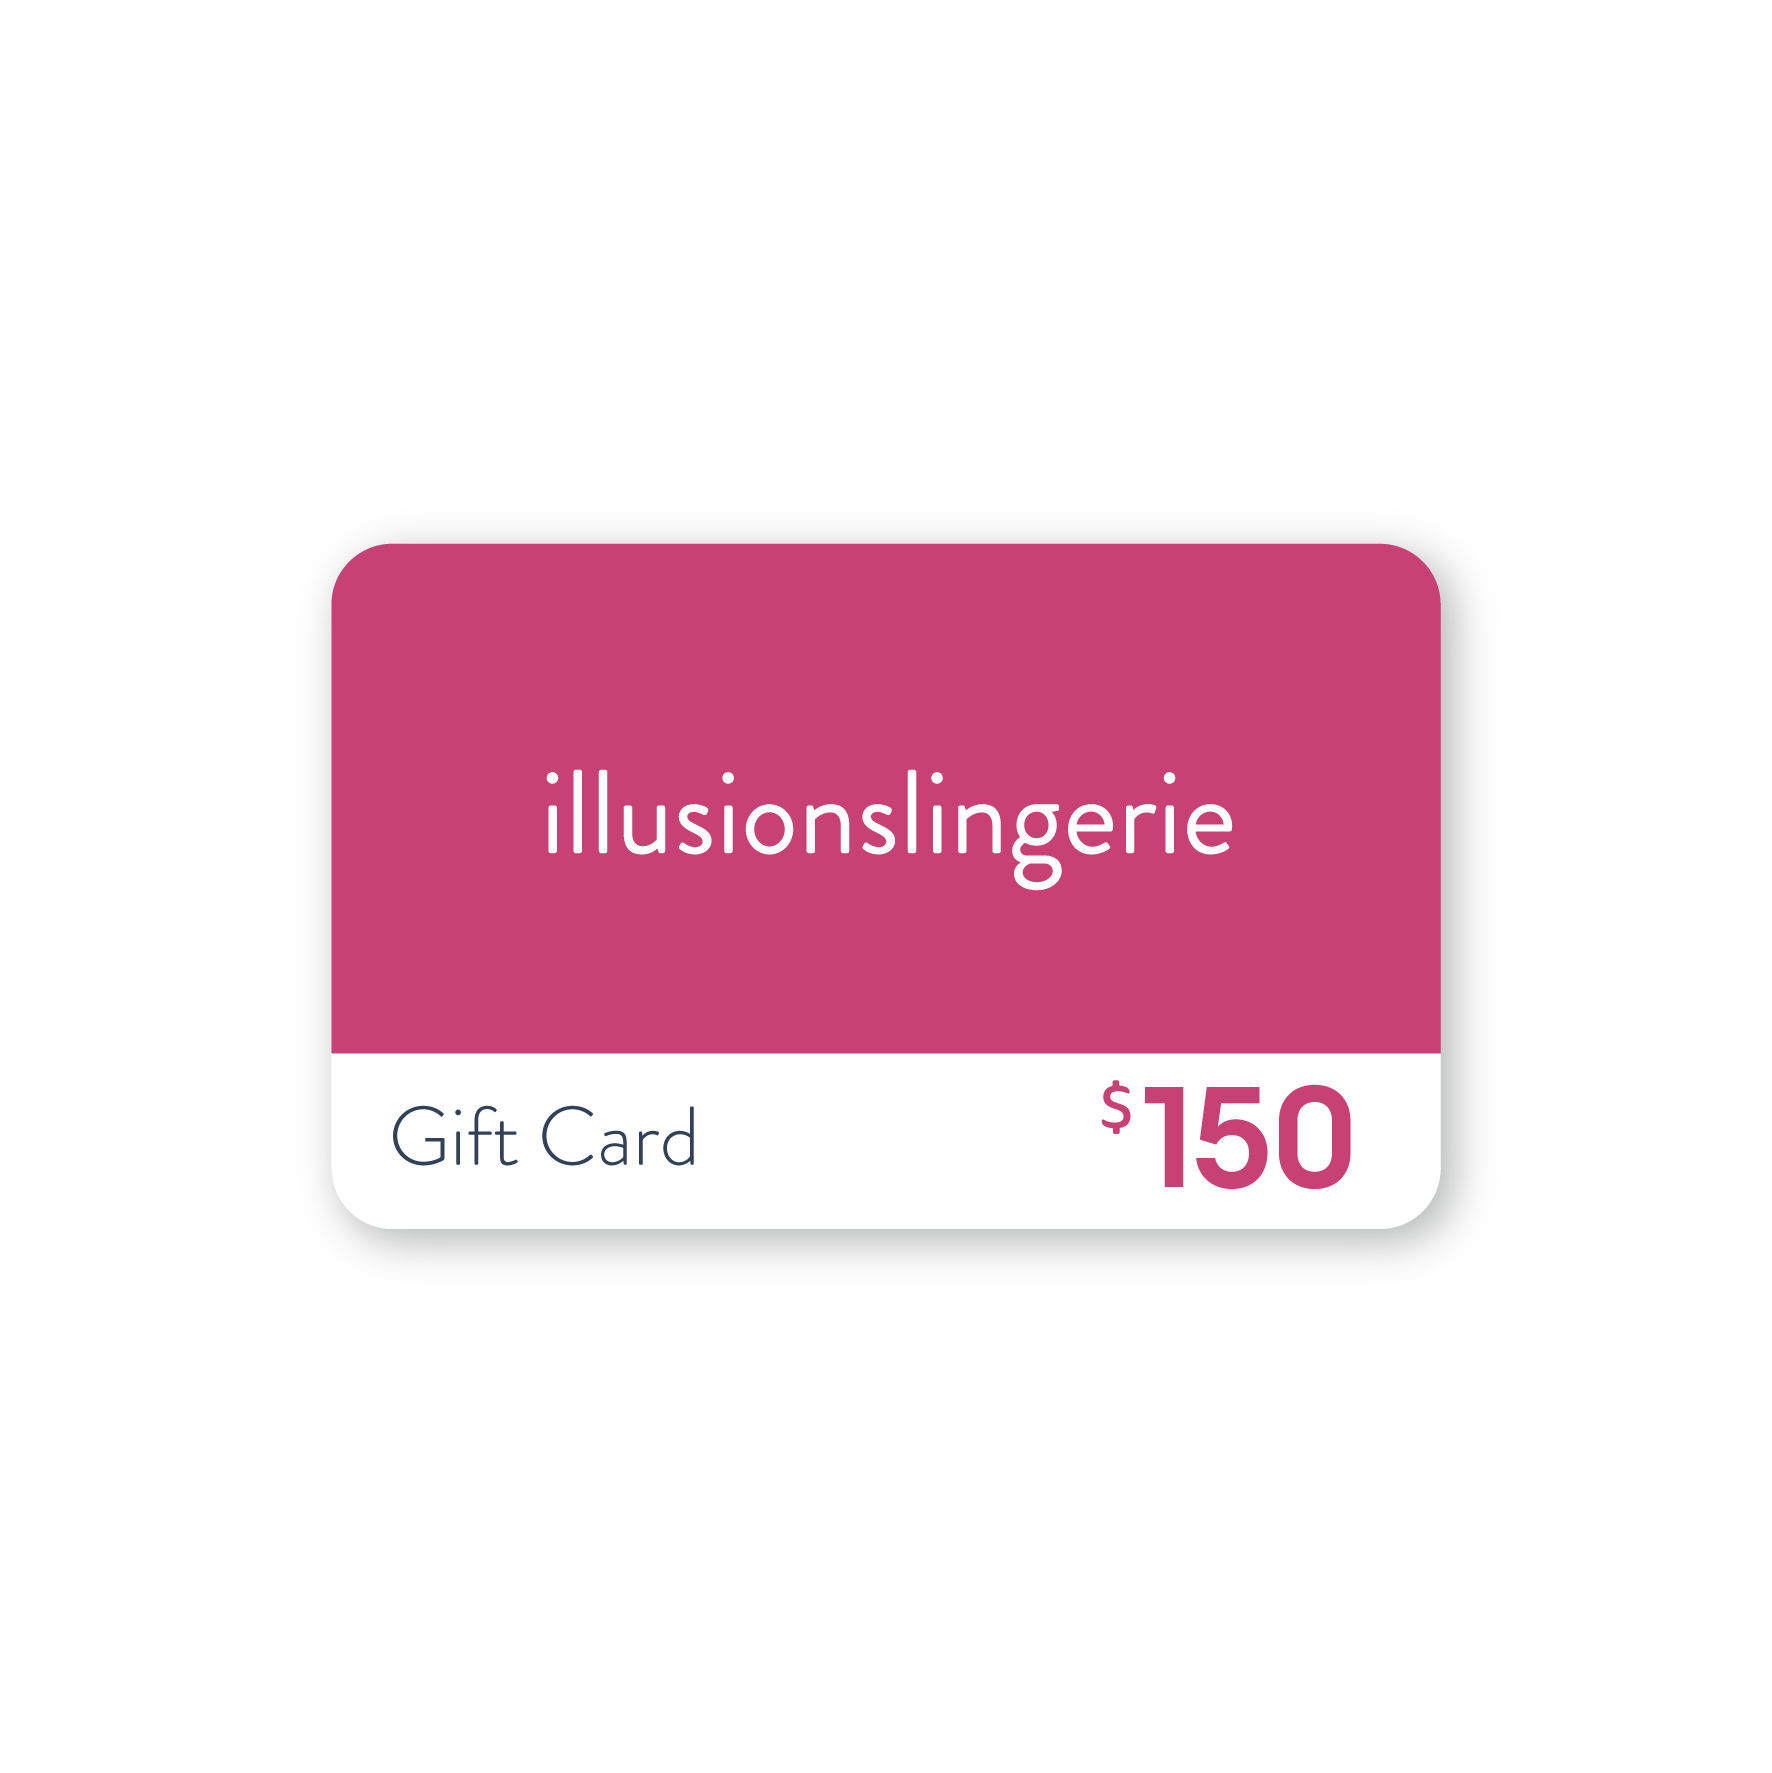 Illusions Lingerie Gift Card $150 Digital Gift Card - Illusions Lingerie from Illusions Lingerie in Melbourne